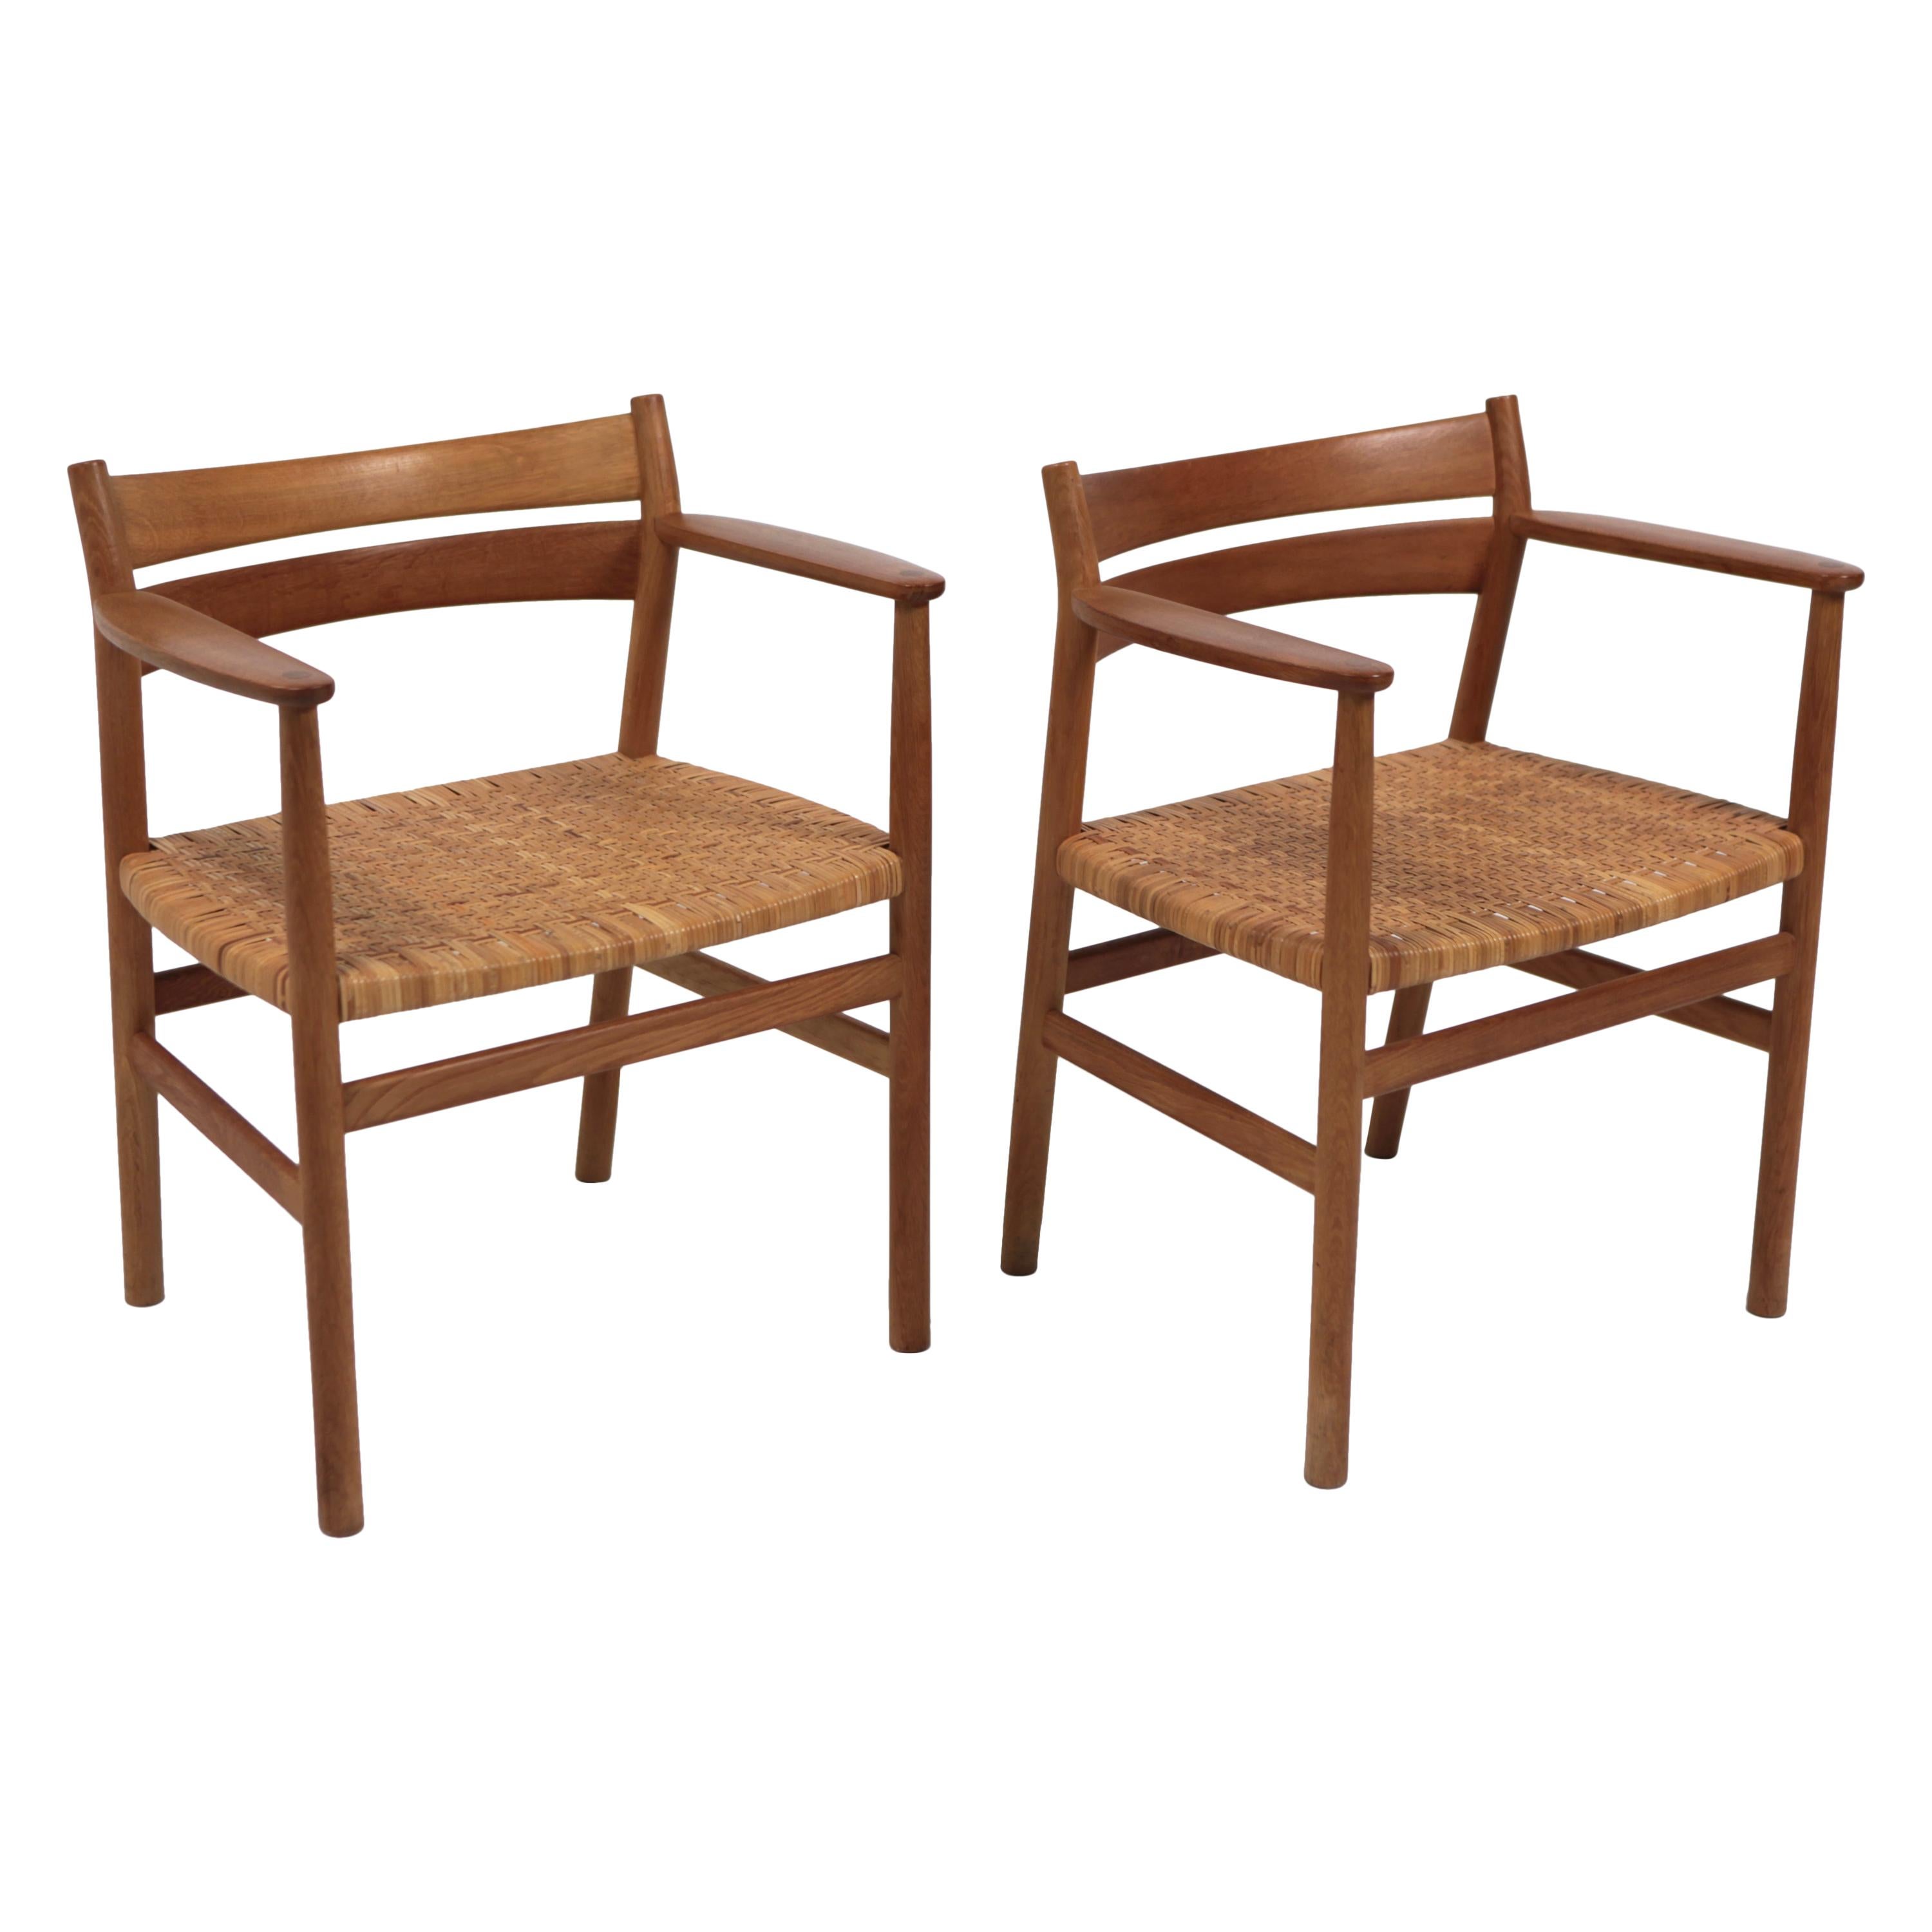 Børge Mogensen, Pair of Rare 'BM1' Armchairs in Oak and Cane, Sweden, 1960s For Sale